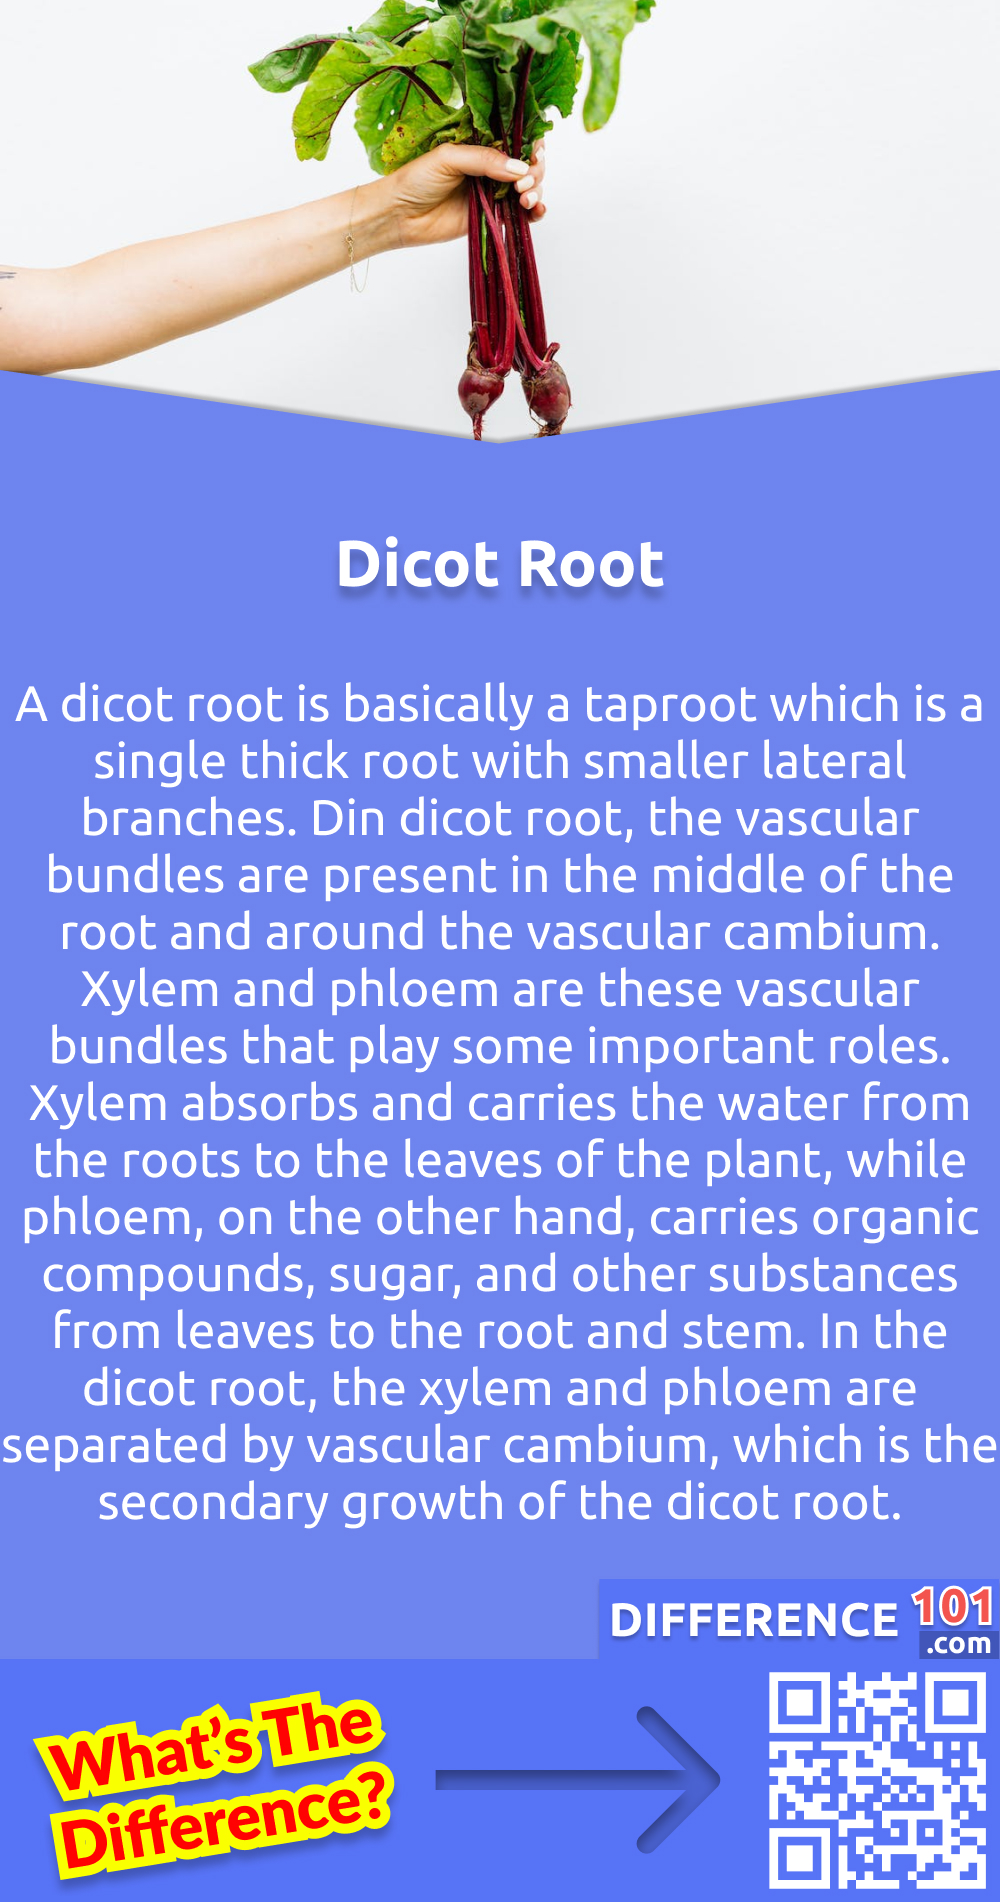 What Is Dicot Root? A dicot root is basically a taproot which is a single thick root with smaller lateral branches. Din dicot root, the vascular bundles are present in the middle of the root and around the vascular cambium. Xylem and phloem are these vascular bundles that play some important roles. Xylem absorbs and carries the water from the roots to the leaves of the plant, while phloem, on the other hand, carries organic compounds, sugar, and other substances from leaves to the root and stem. In the dicot root, the xylem and phloem are separated by vascular cambium, which is the secondary growth of the dicot root.